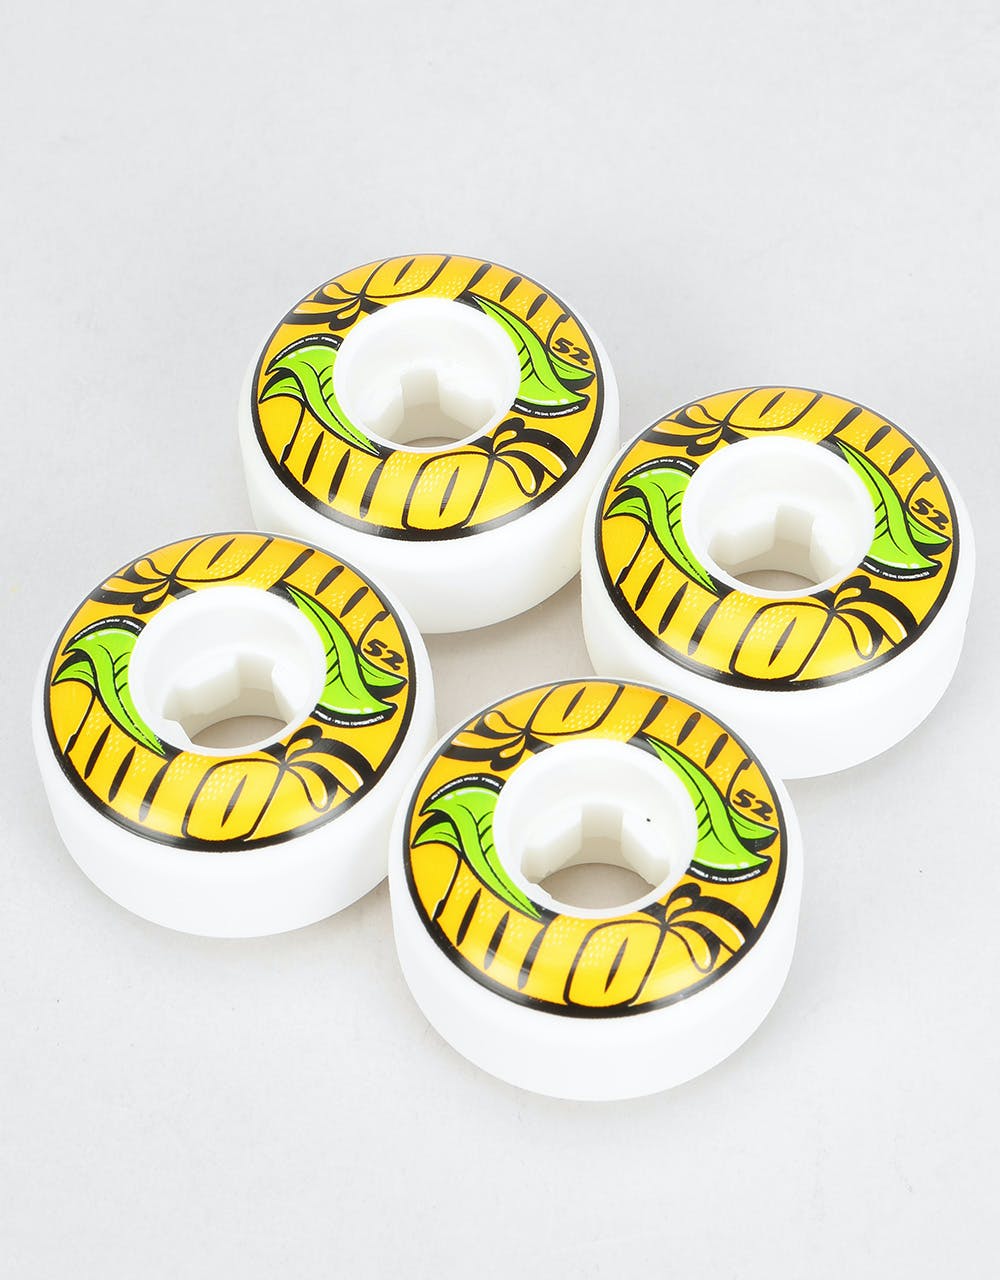 OJ From Concentrate EZ Edge 101a Skateboard Wheel - 52mm